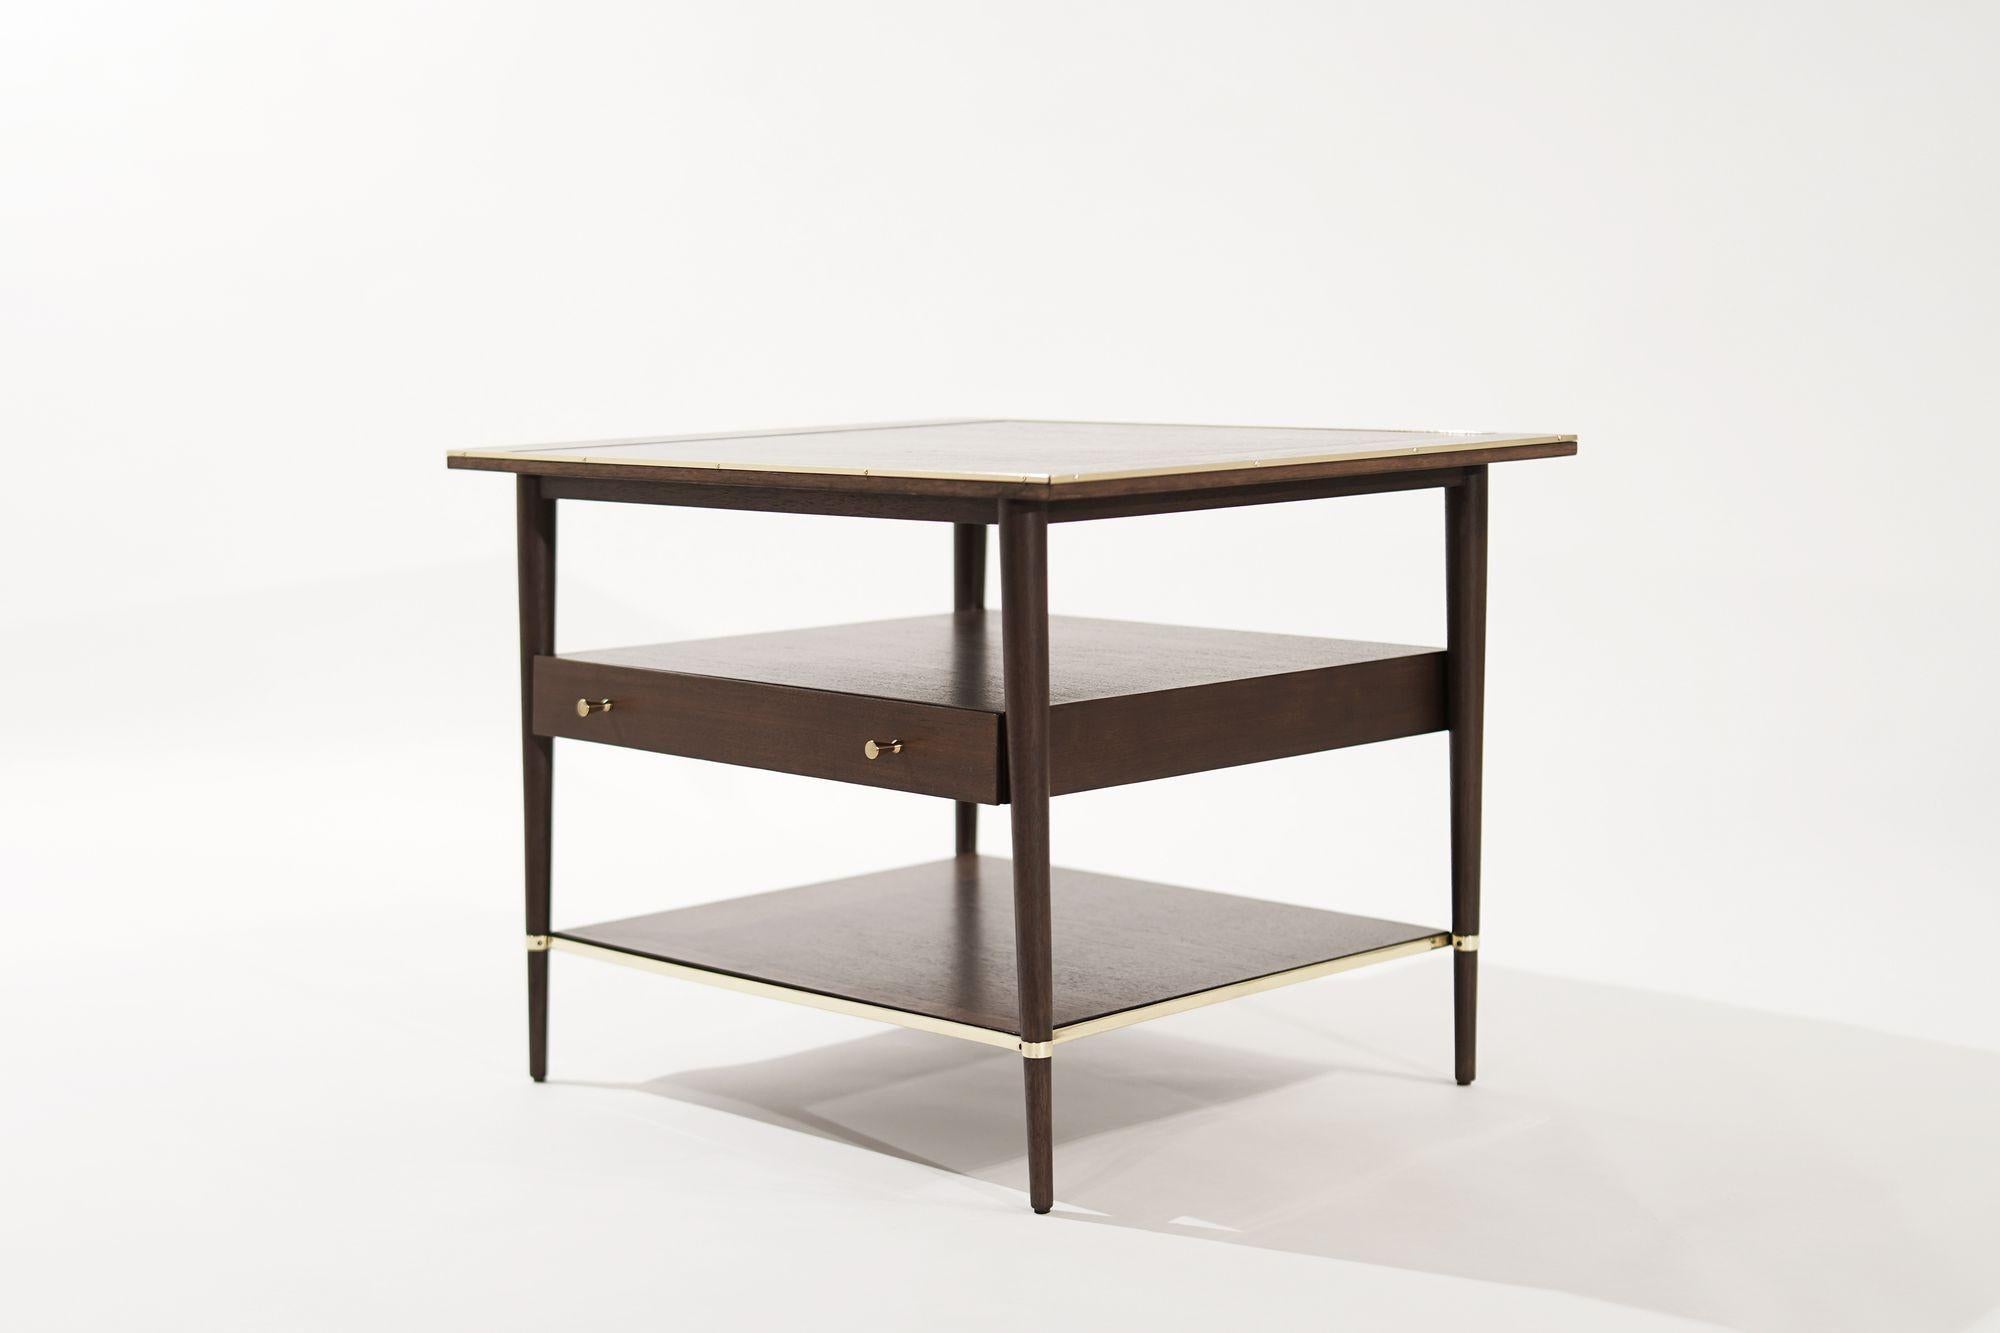 American Occasional Table in Mahogany by Paul McCobb, Connoisseur Collection, C. 1950s For Sale